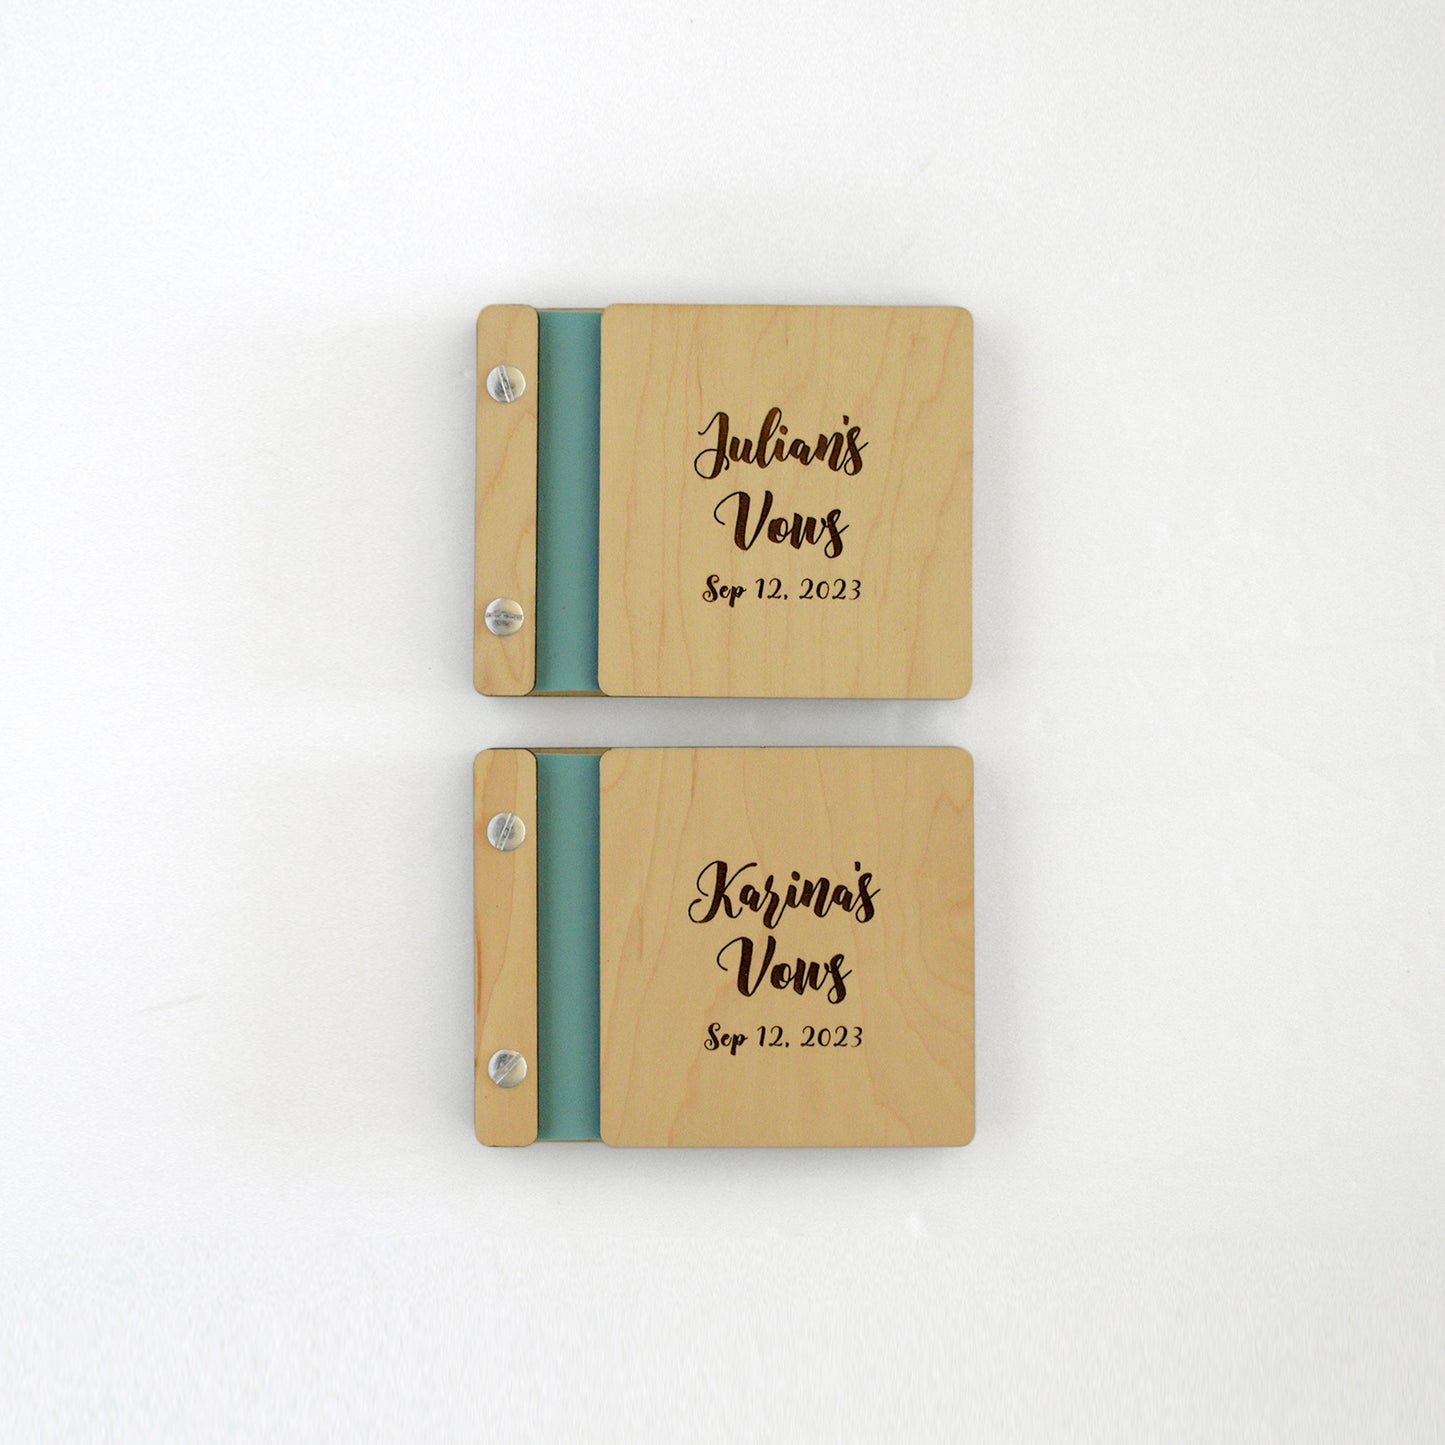 Two vow books sit on a table next to one another. Made of maple wood, aqua binding, and silver hardware, they read Julian’s Vows and Karina’s Vows.